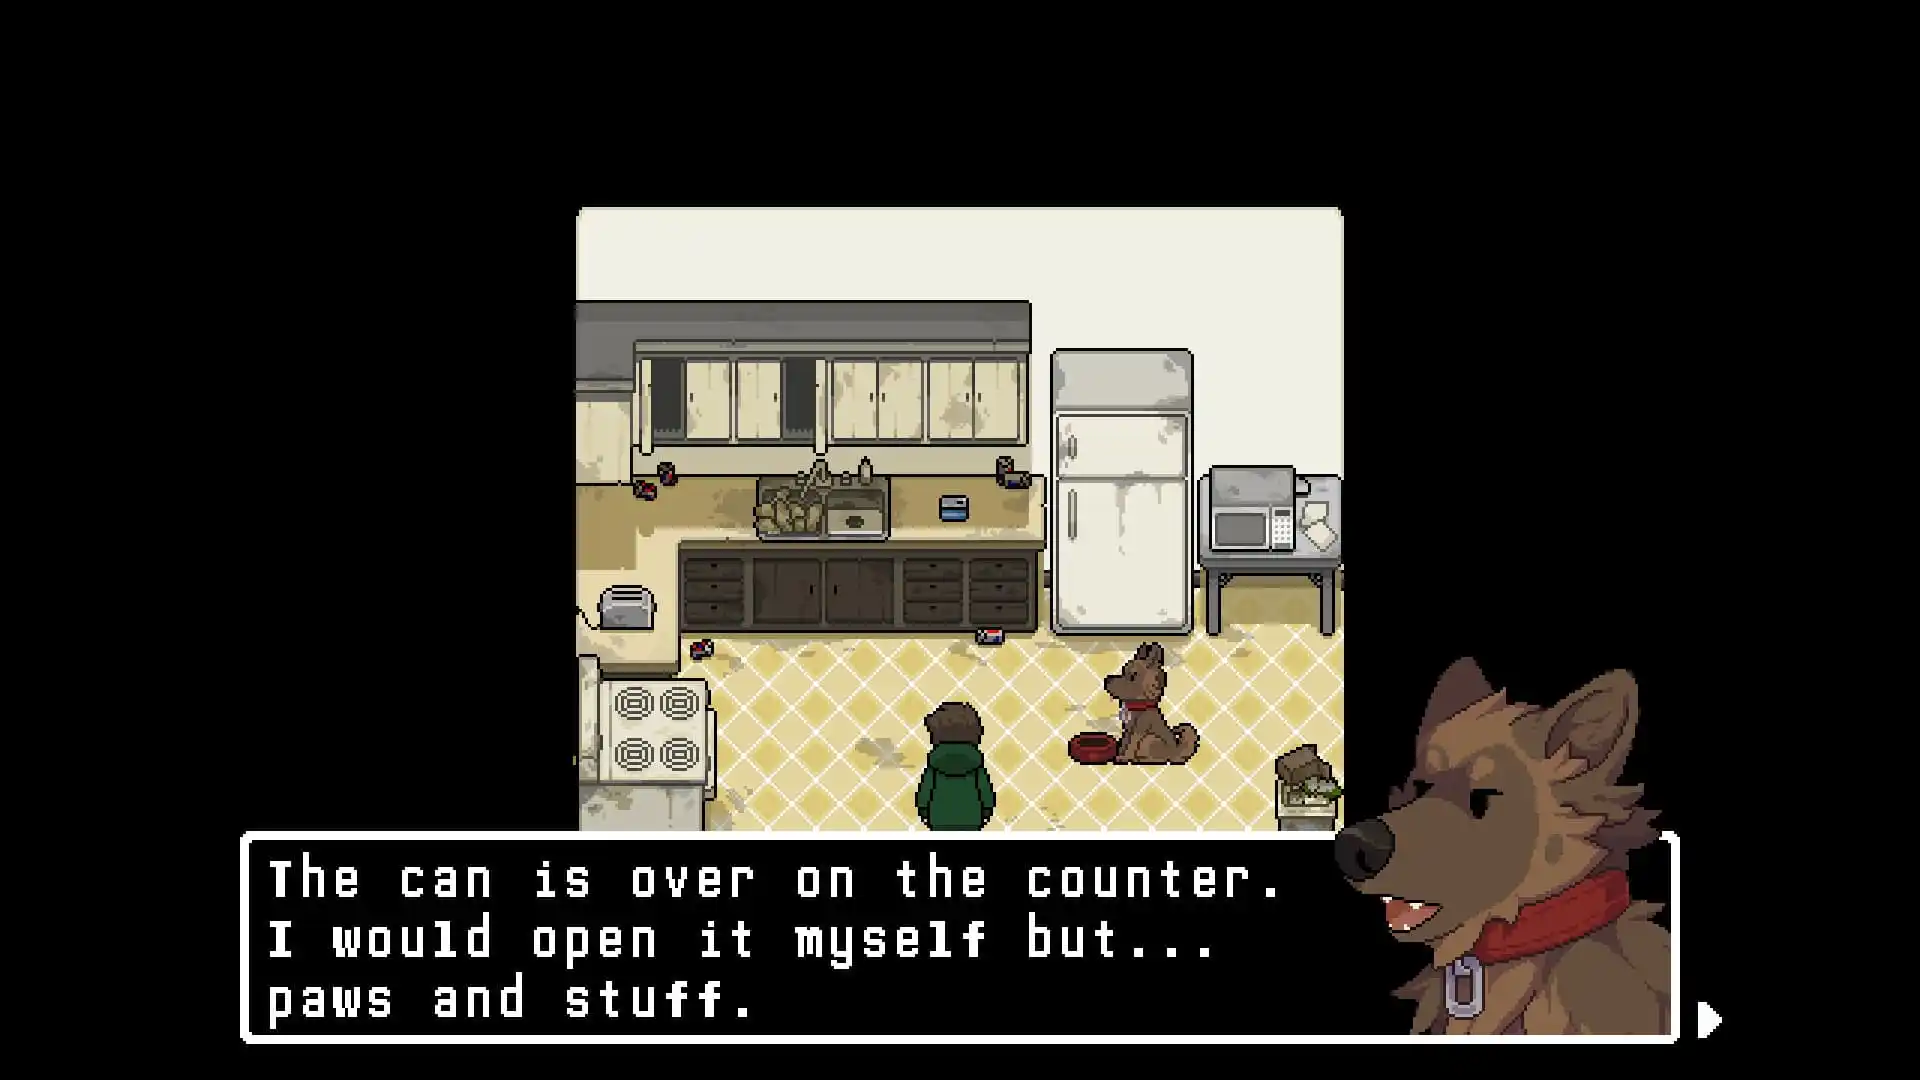 A screenshot from Heartbound by Pirate Software.